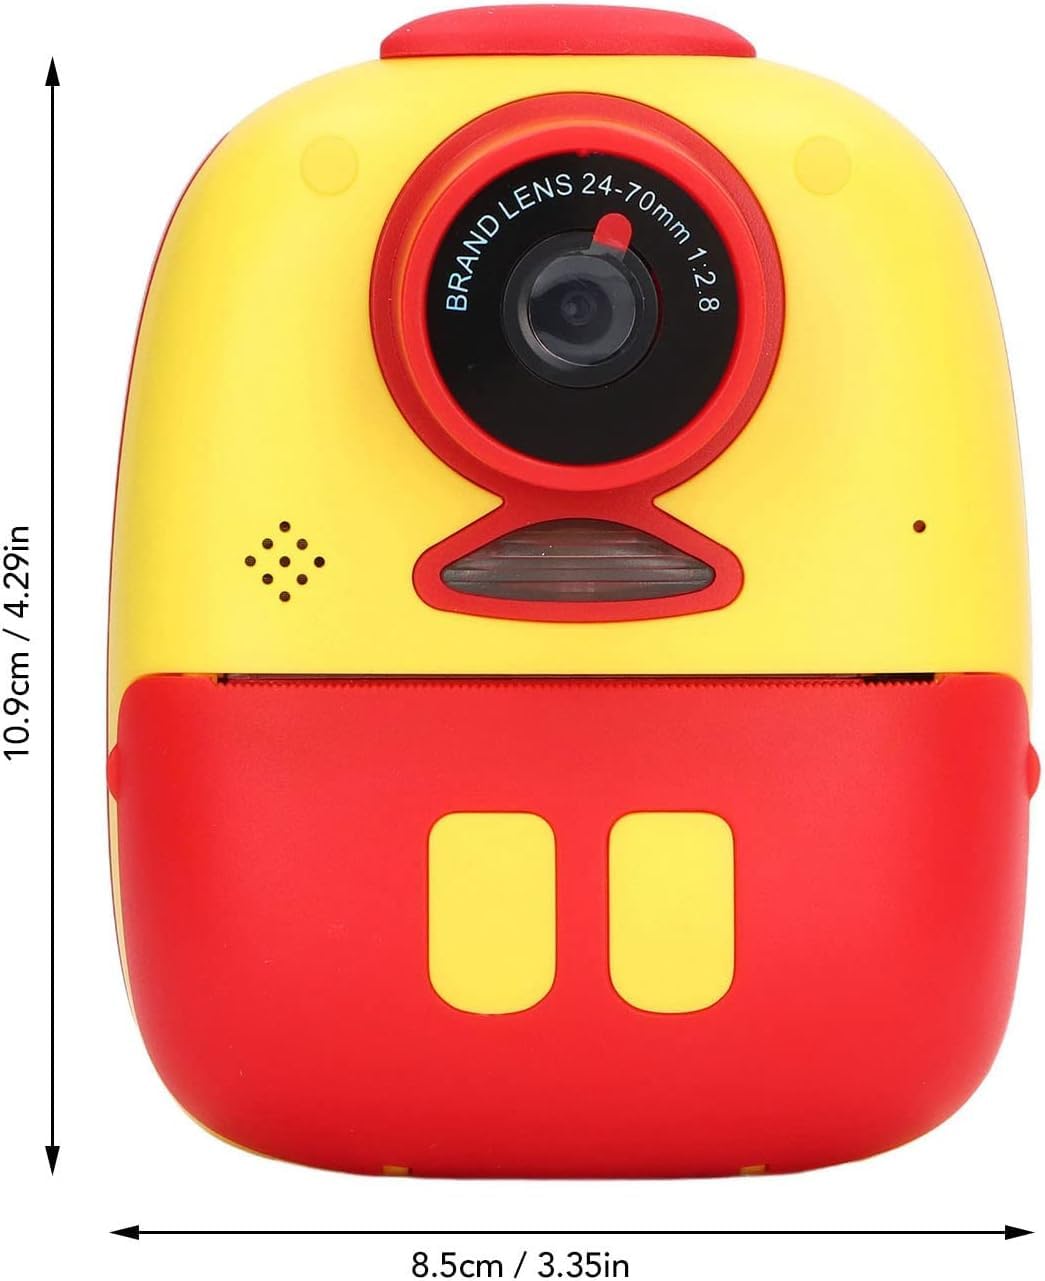 Instant Printing Retro Photo and Video Camera for Kids, 1080P Full-HD Video(Red)